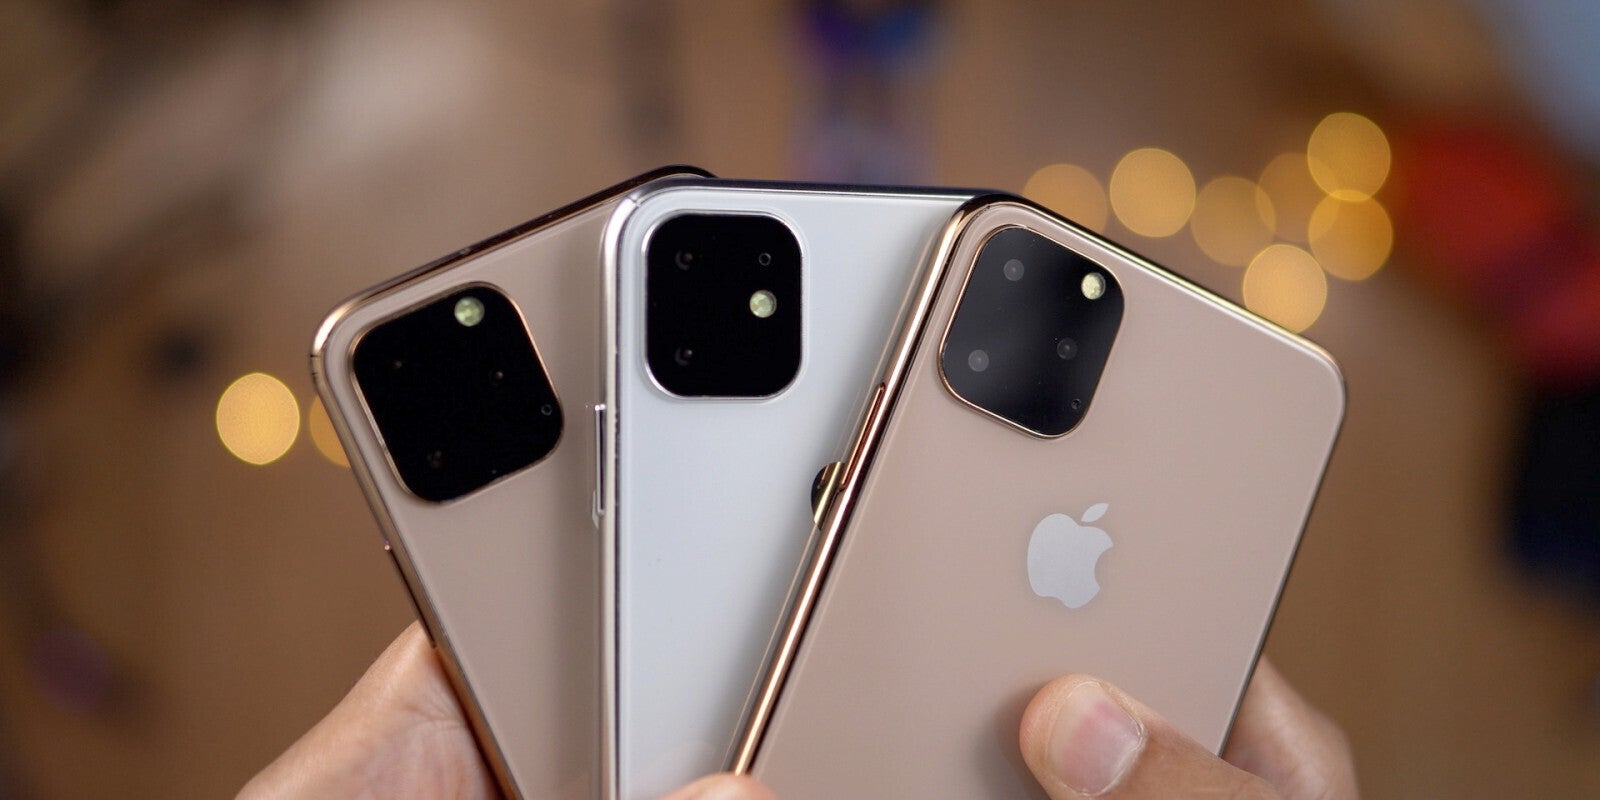 Renders of the iPhone 11 Pro - All the exciting new smartphones coming out in September 2019